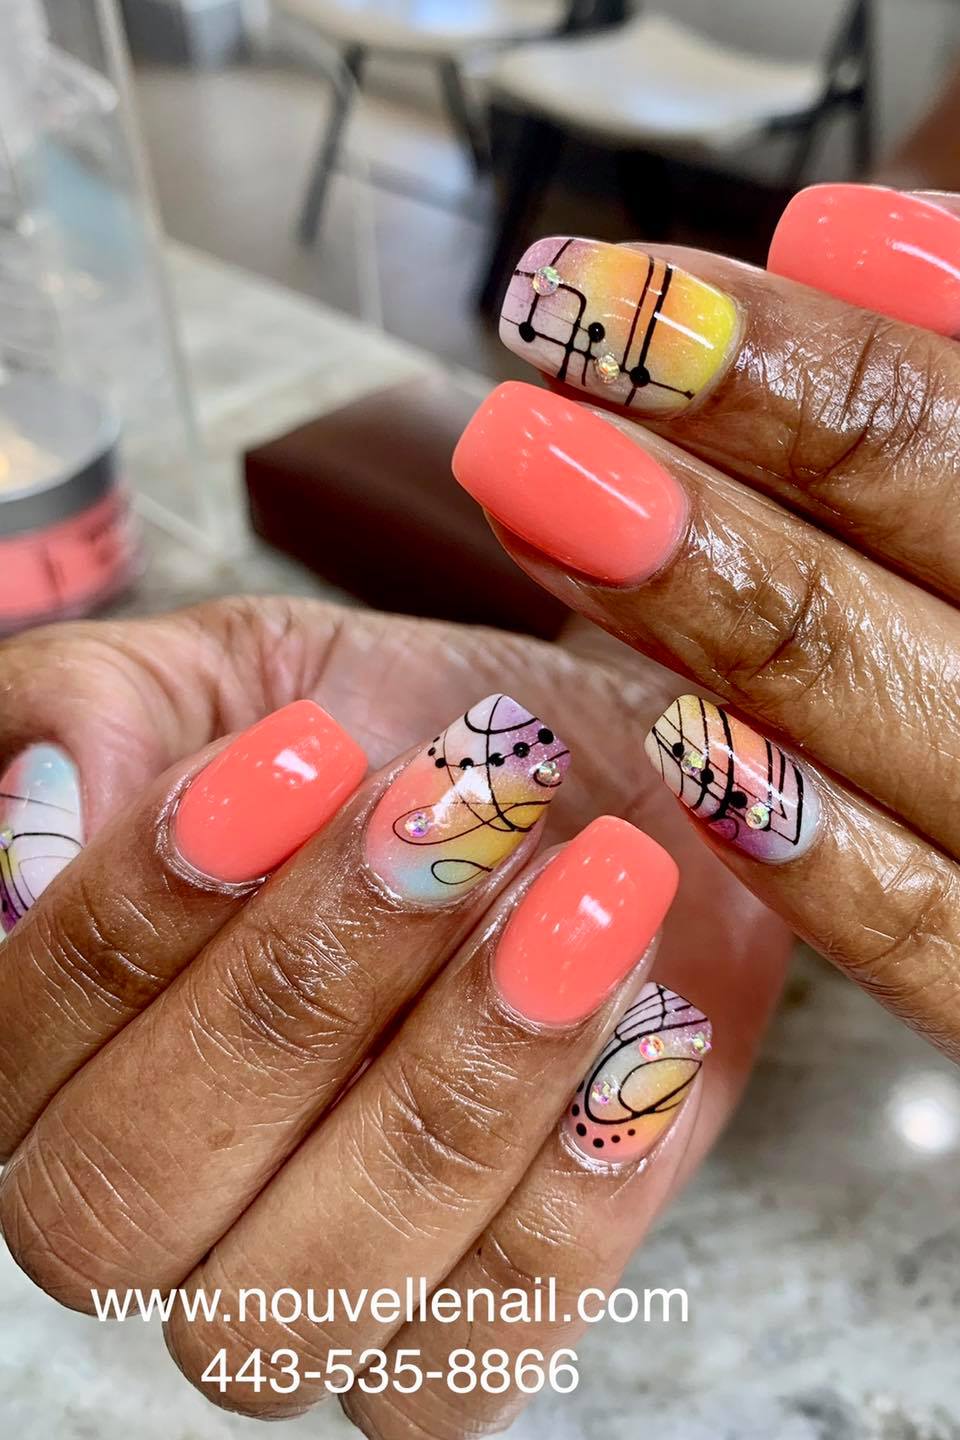 Dipping Powder manicure with free styled designs